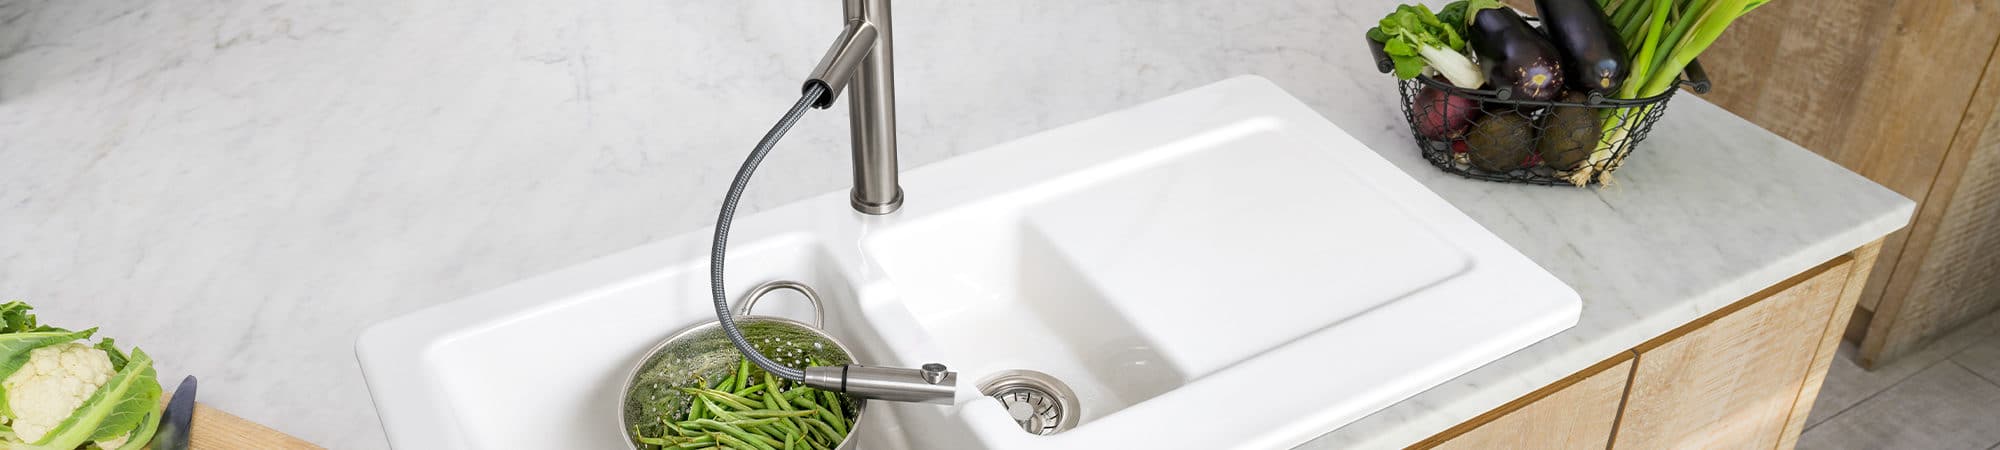 Ceramic Sink with Stainless Steel Pull-out Spray Tap